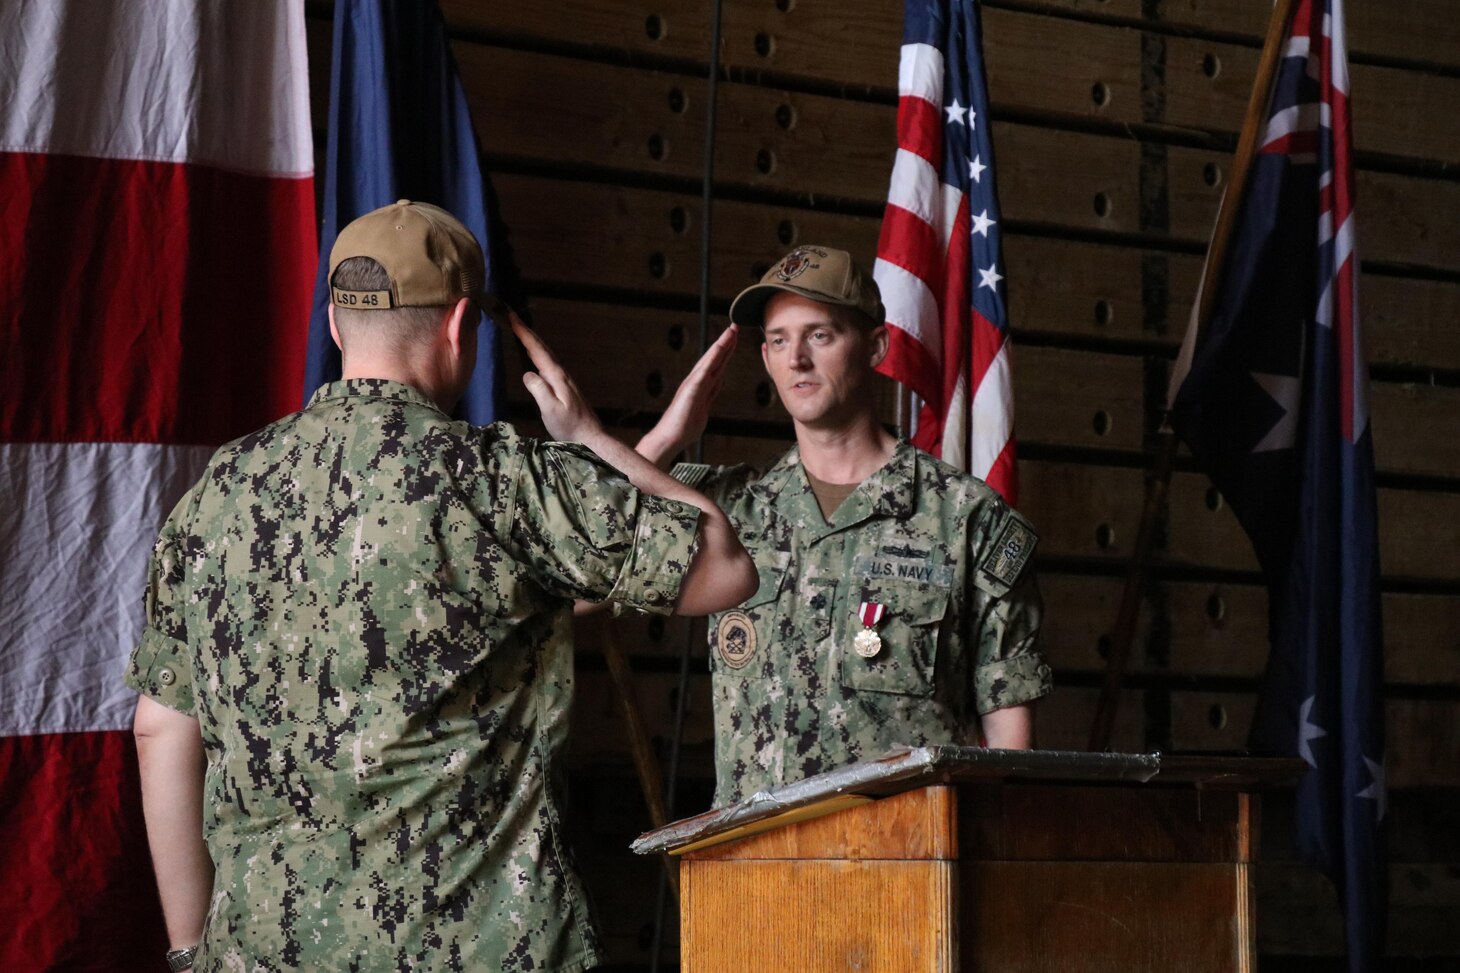 DARWIN, Australia (May 11, 2022) Cmdr. Keith Tate, right, 21st commanding officer of the forward-deployed amphibious dock landing ship USS Ashland (LSD 48), relinquishes command to Cmdr. Dirk Sonnenberg during Ashland’s change-of-command ceremony, May 11 in Australia. Ashland, part of Amphibious Squadron 11, is operating in the U.S. 7th Fleet area of responsibility to enhance interoperability with allies and partners, and serve as a ready response force to defend peace and stability in the Indo-Pacific region. (U.S. Navy photo by Lt. j.g. John Malik)